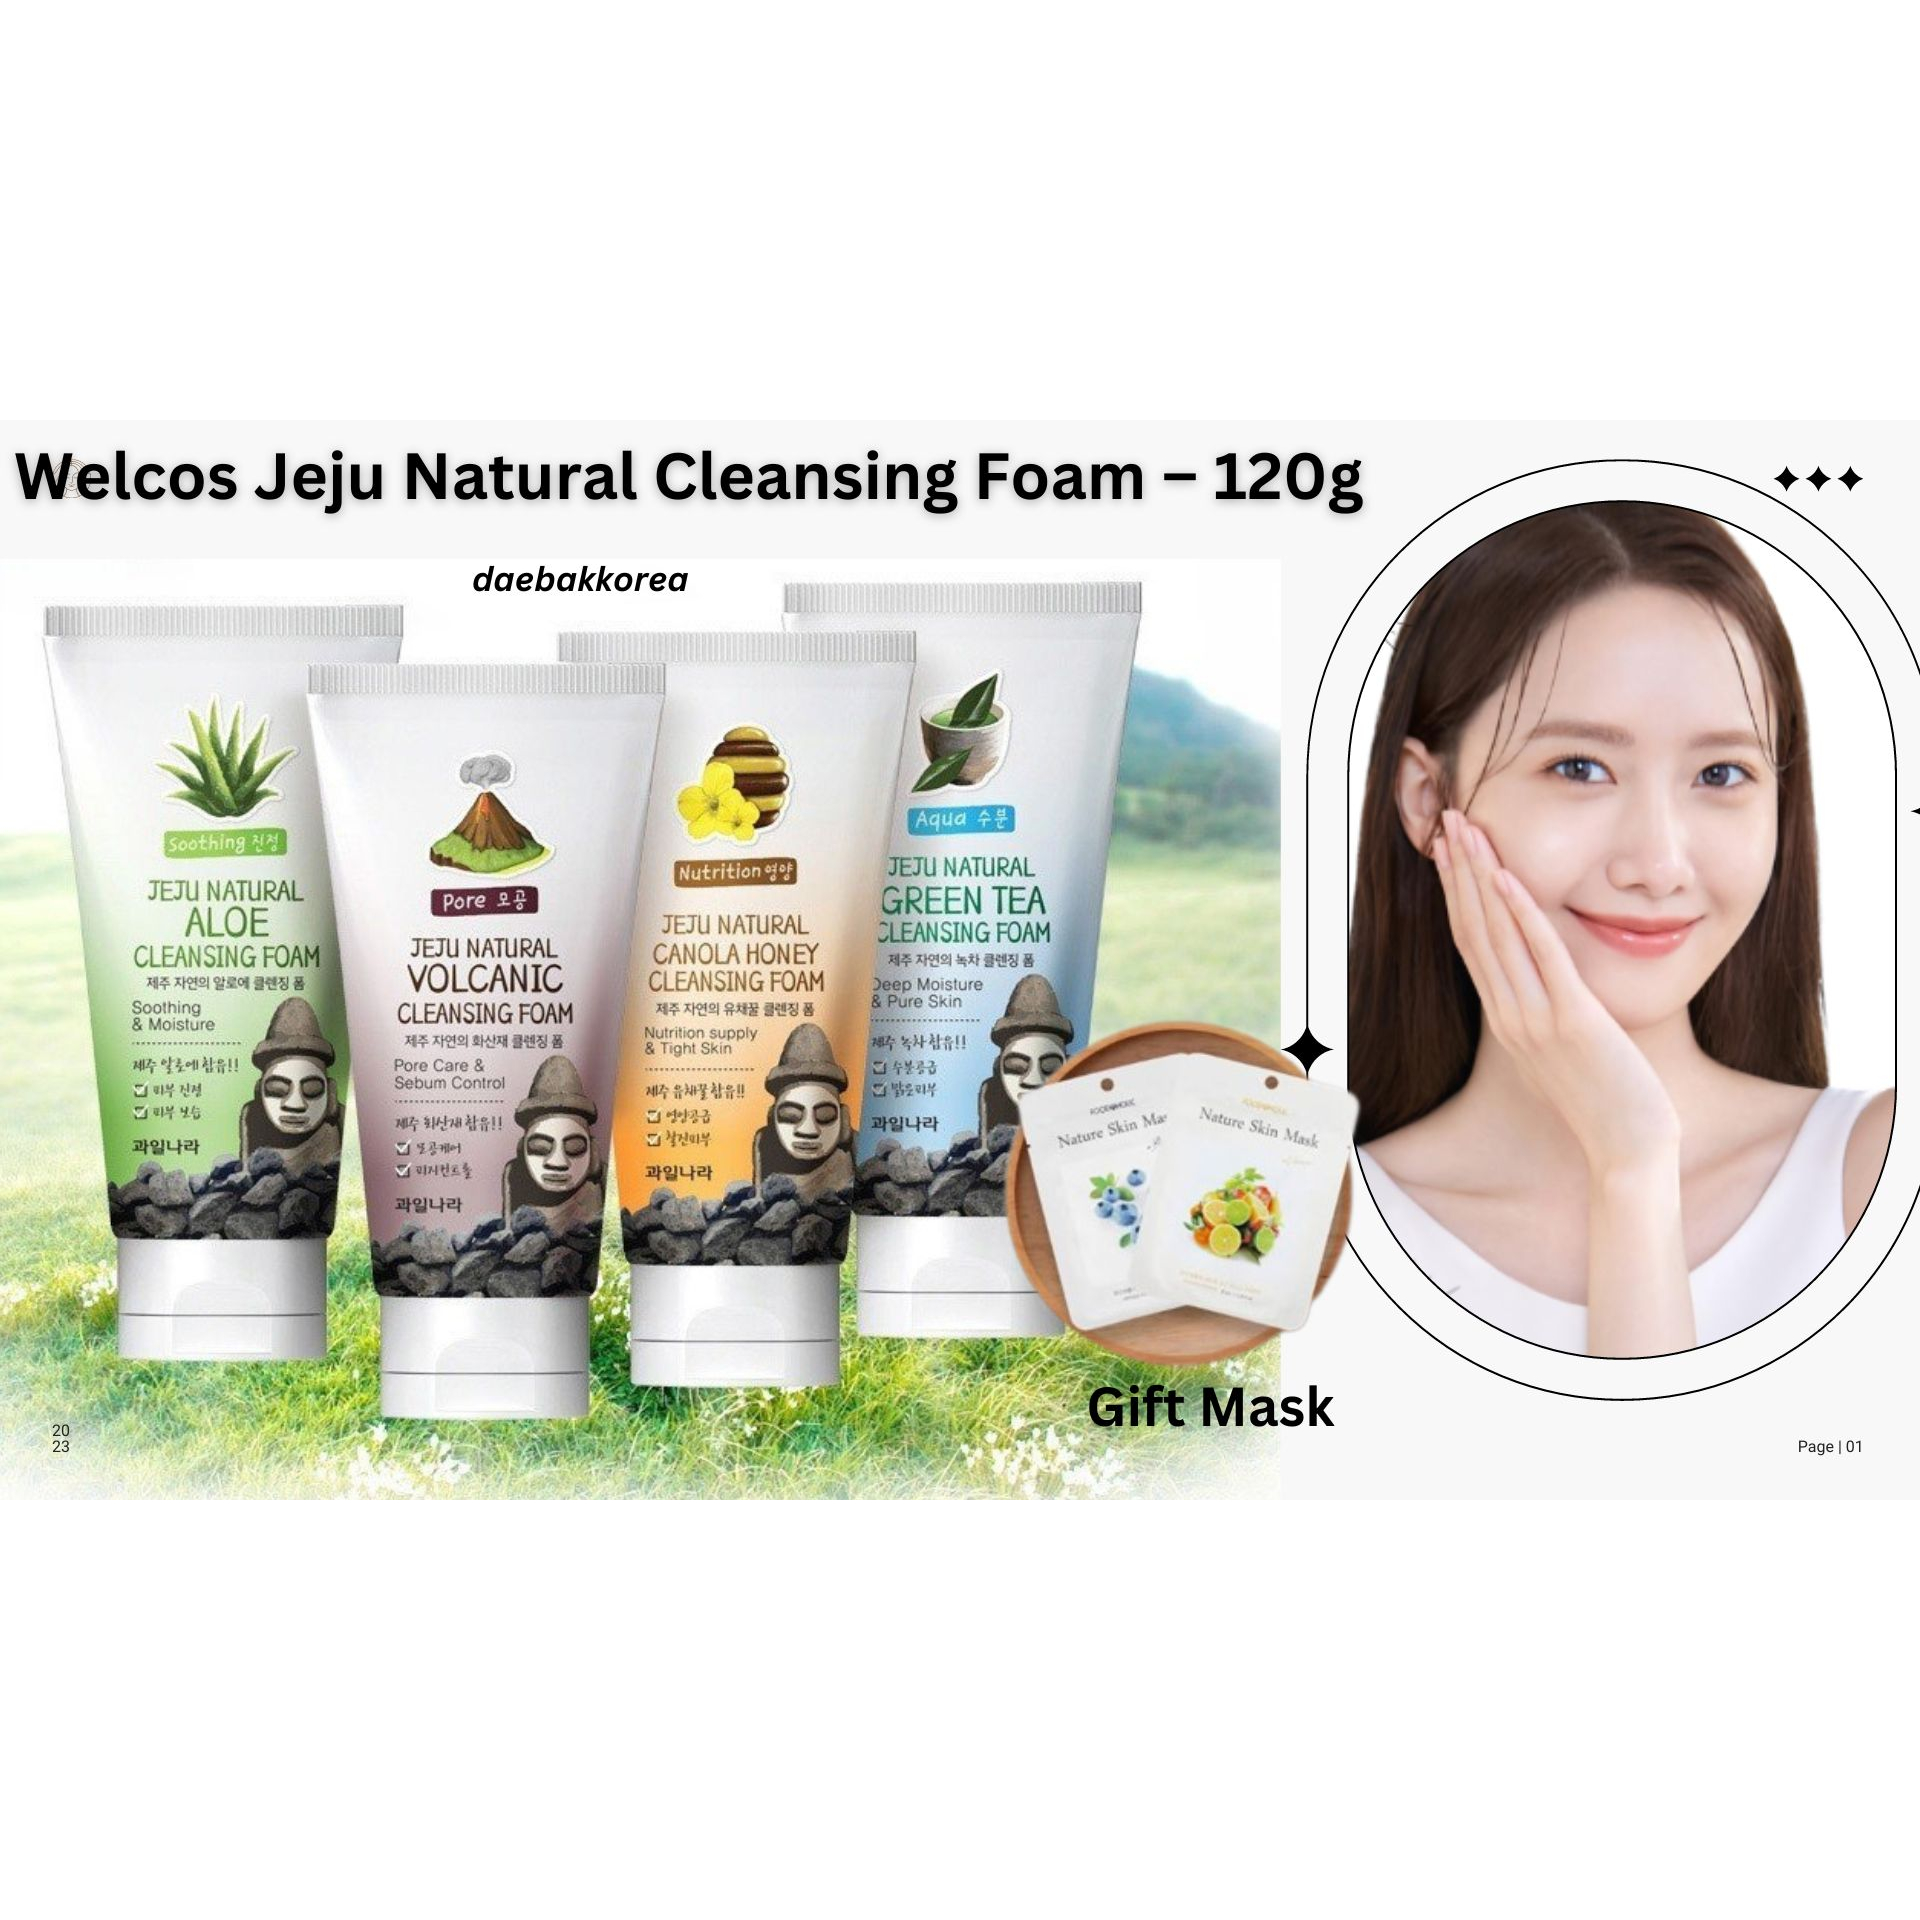 Ready Welcos Jeju Natural Cleansing Foam – 120g